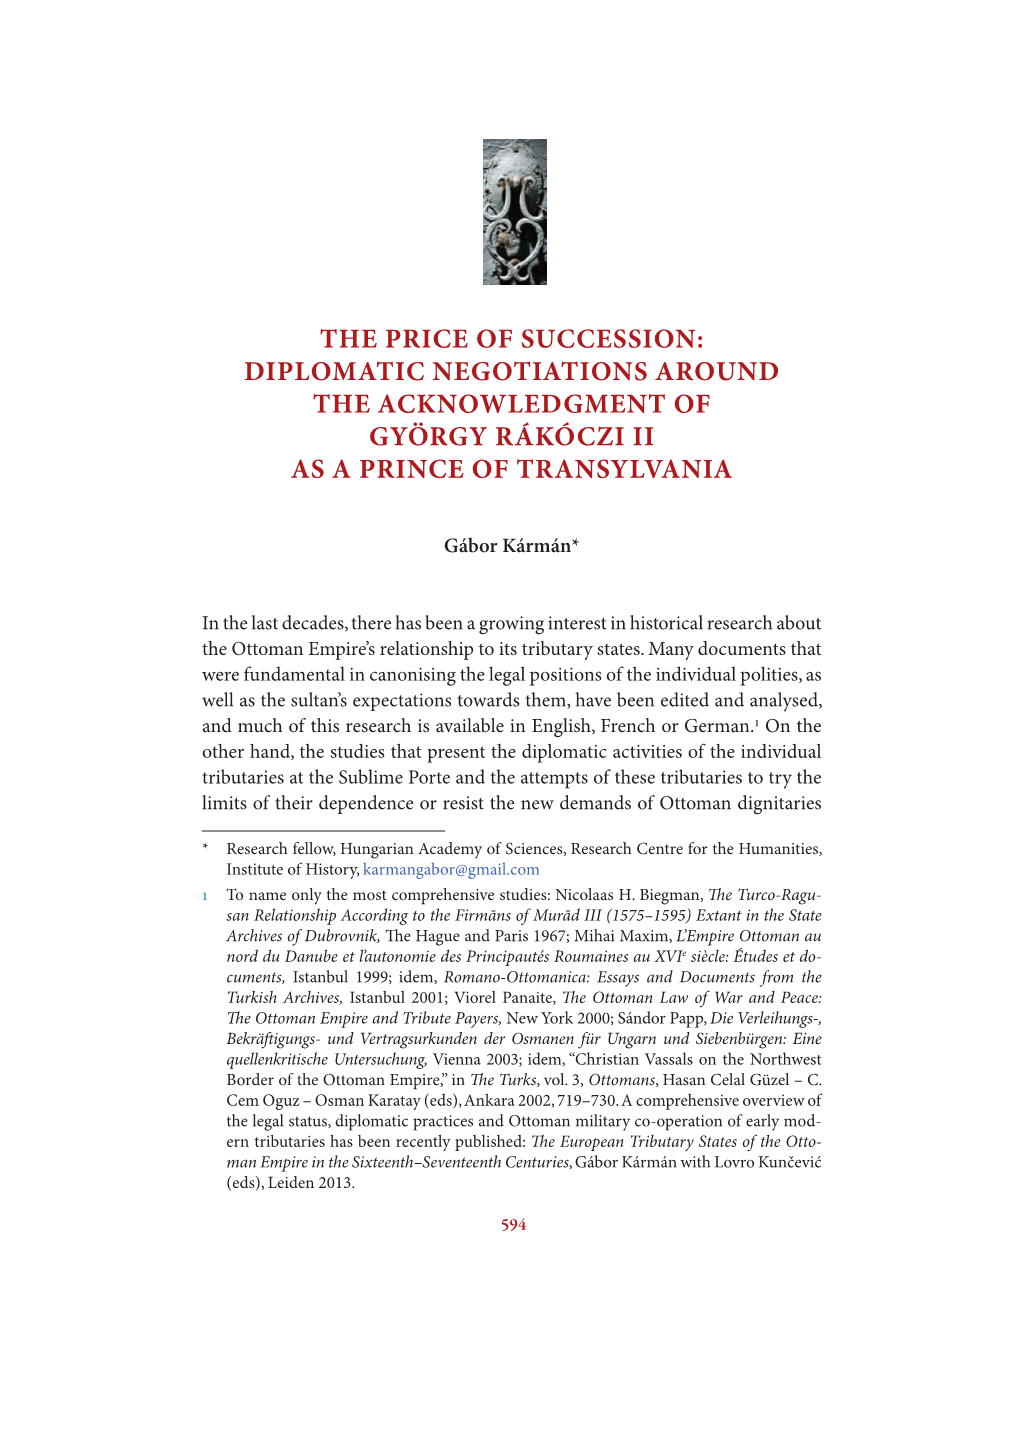 The Price of Succession: Diplomatic Negotiations Around the Acknowledgment of György Rákóczi Ii As a Prince of Transylvania